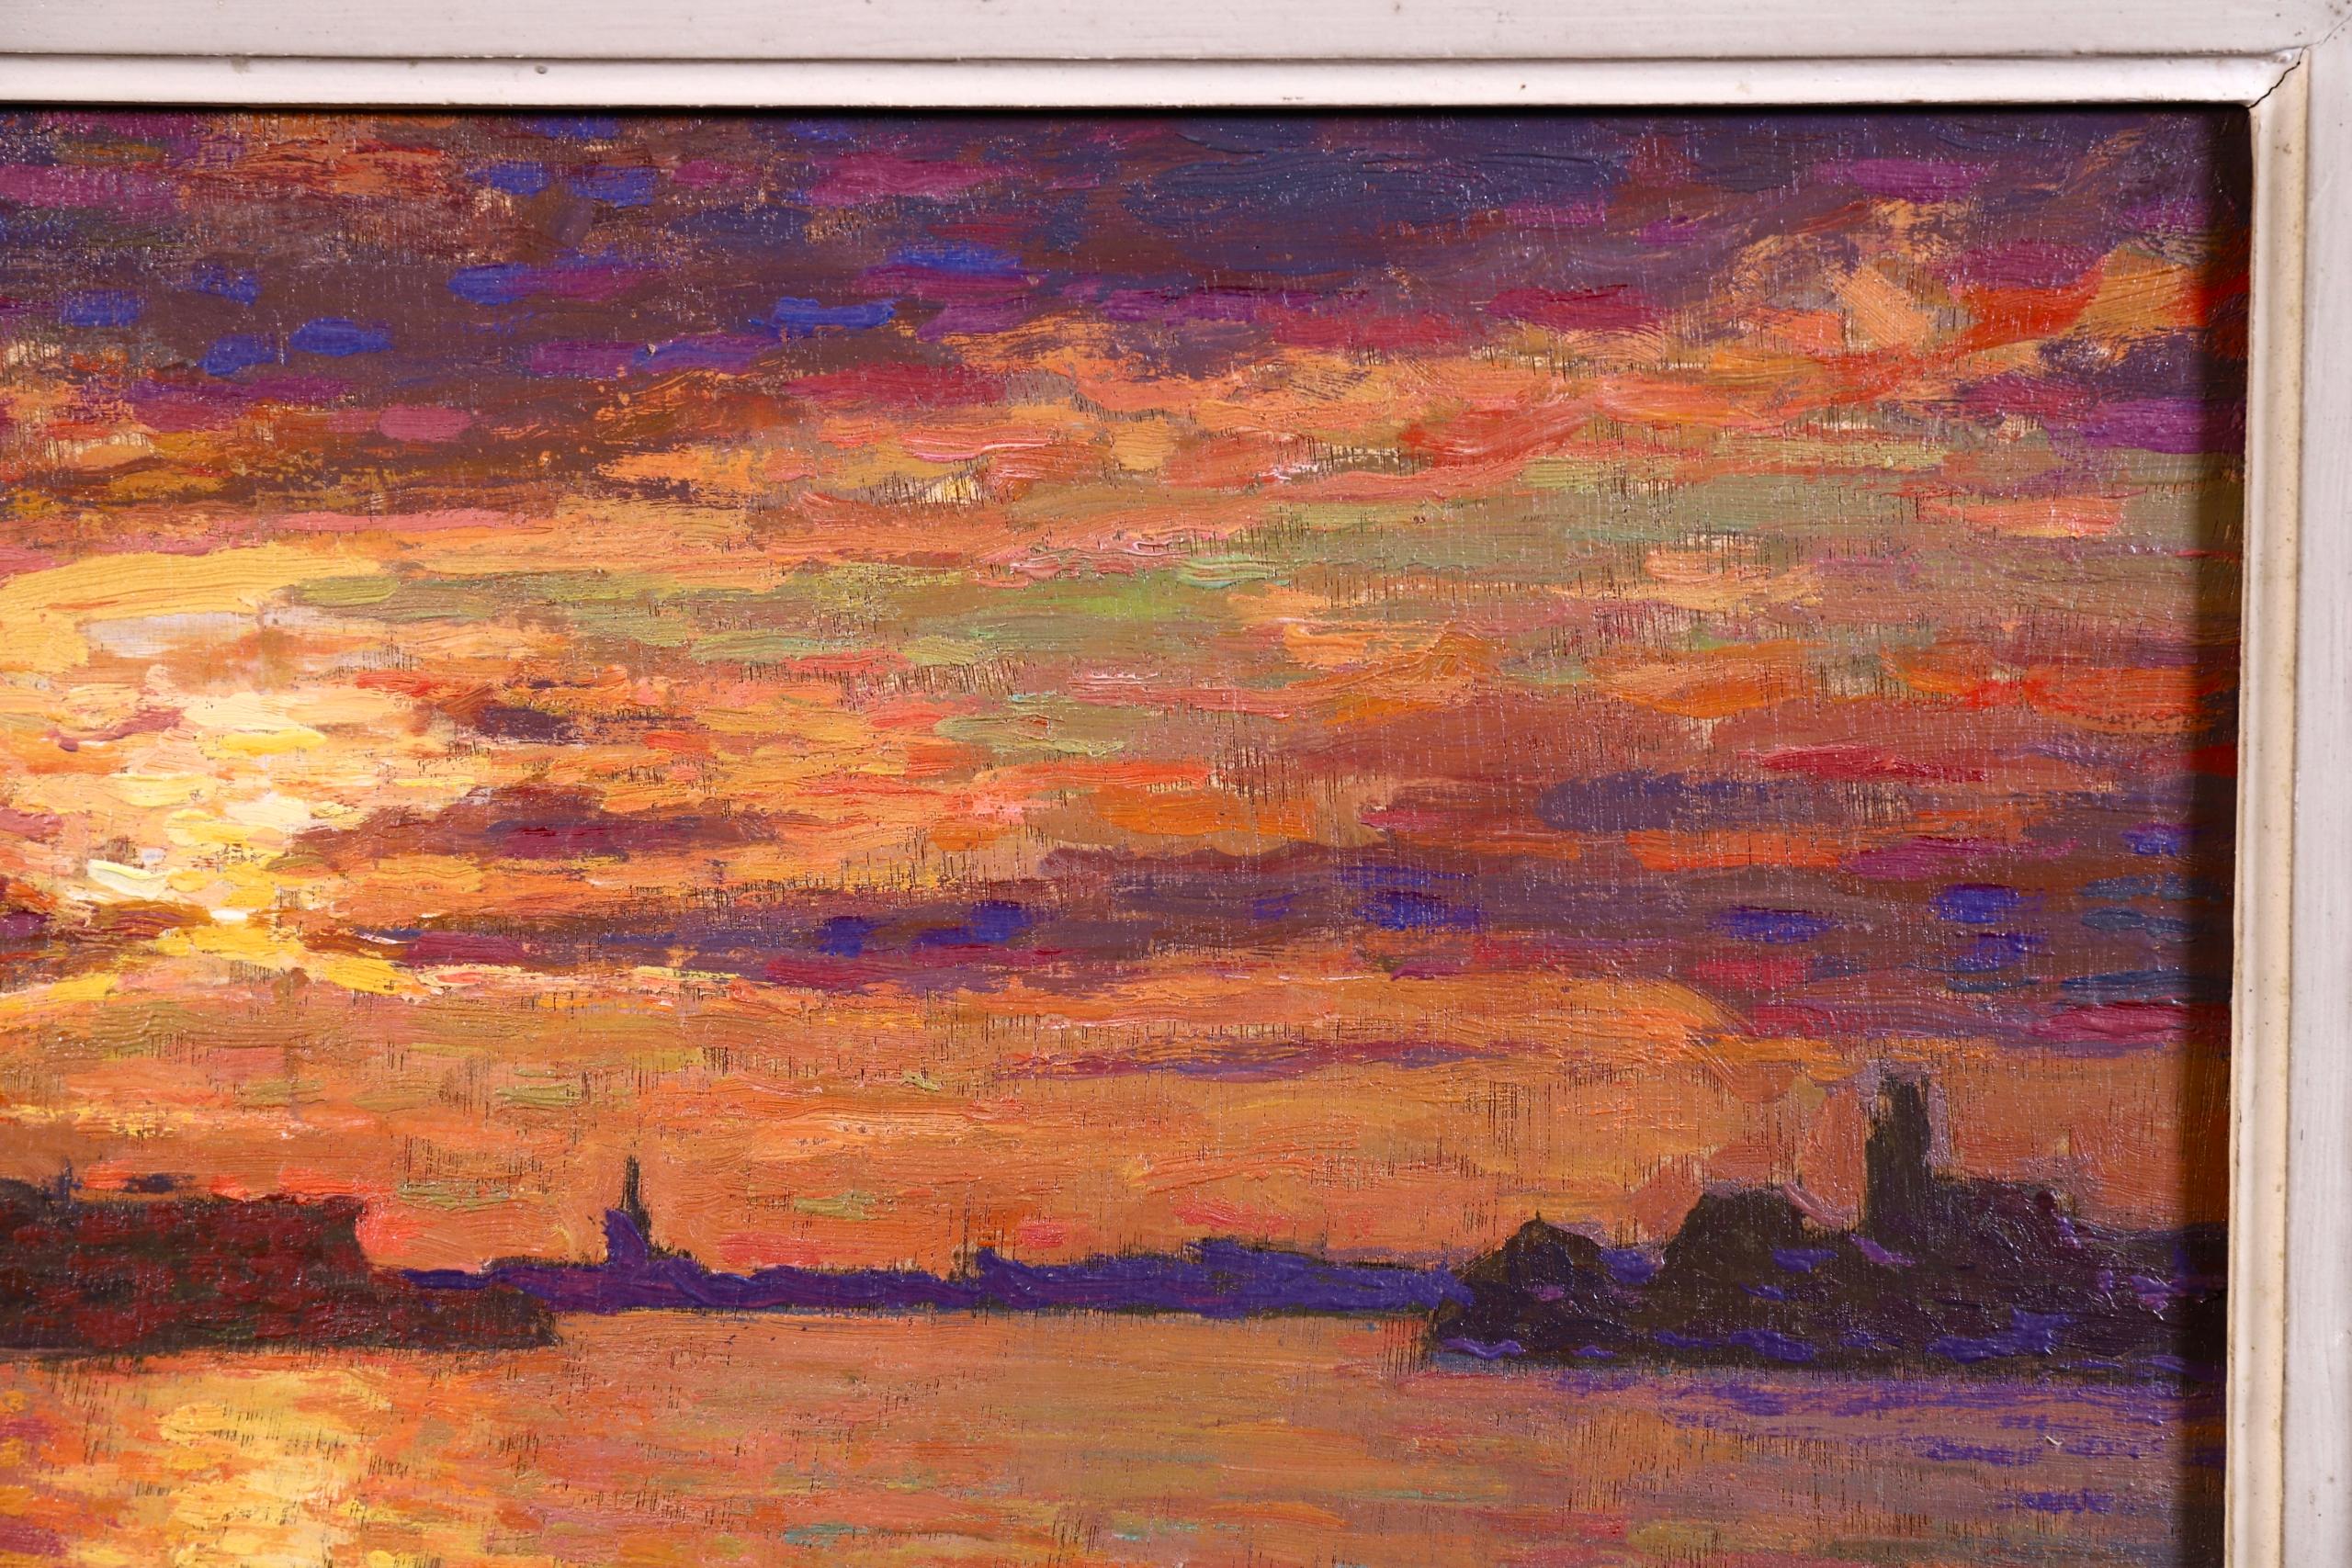 Sunset - Amsterdam - Post Impressionist Oil, Seascape - Jacques Martin-Ferrieres 3